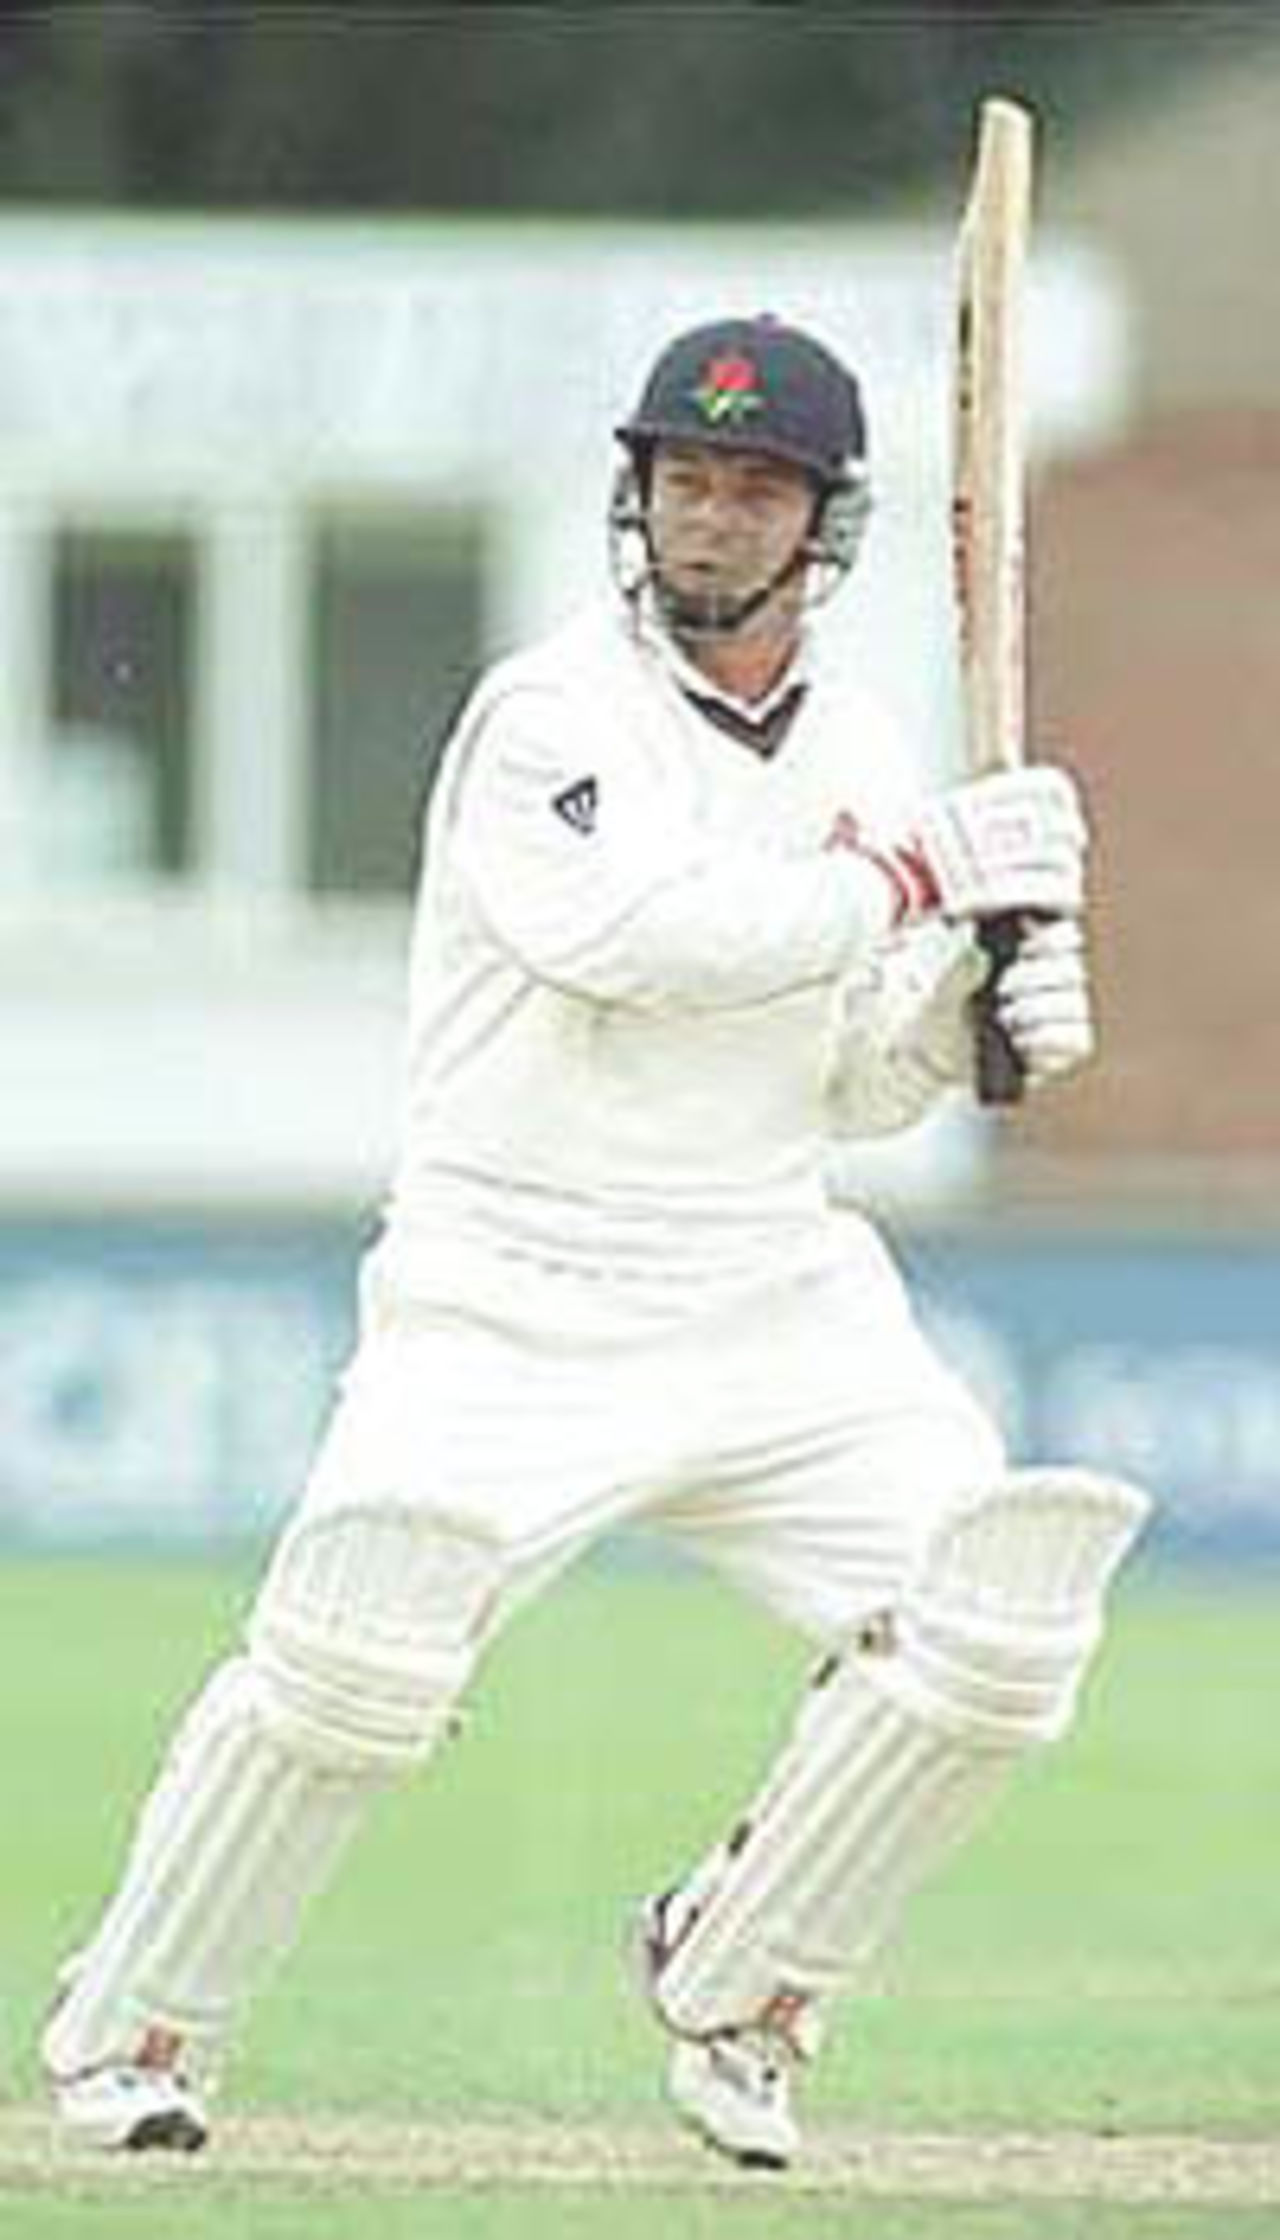 Graham Lloyd watches the course of the ball after playing the cut, PPP healthcare County Championship Division One, 2000, Derbyshire v Lancashire, County Ground, Derby, 07-10 July 2000 (Day 2).